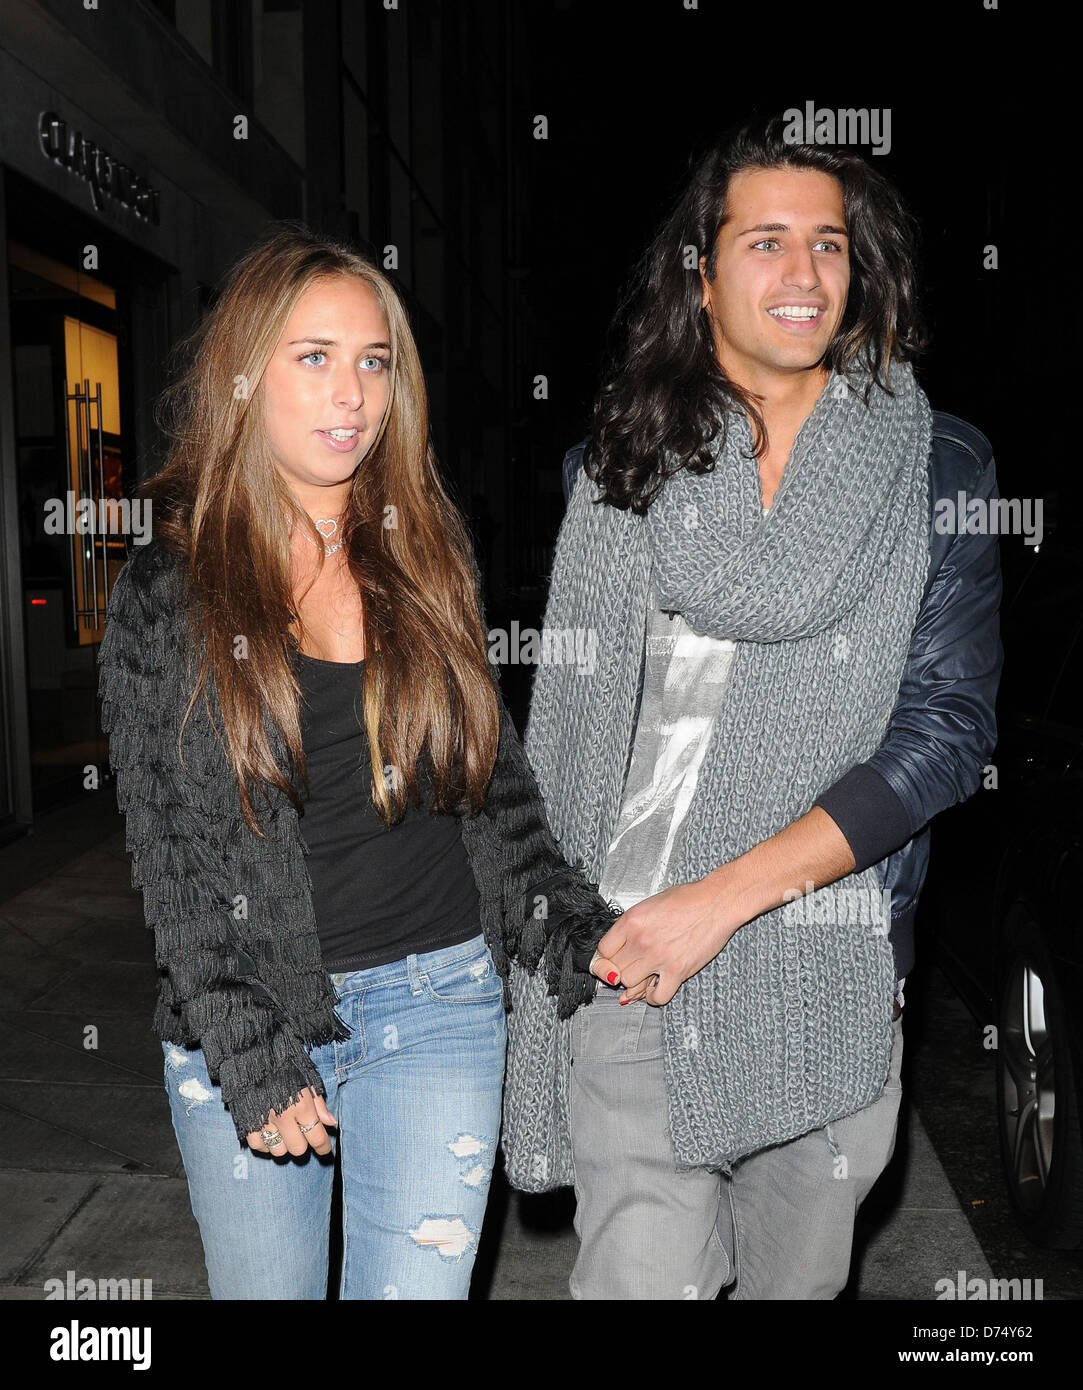 Made in Chelsea's Ollie Locke and socialite Chloe Green, daughter of Topshop  boss Philip Green, walk hand-in-hand as they leave Stock Photo - Alamy